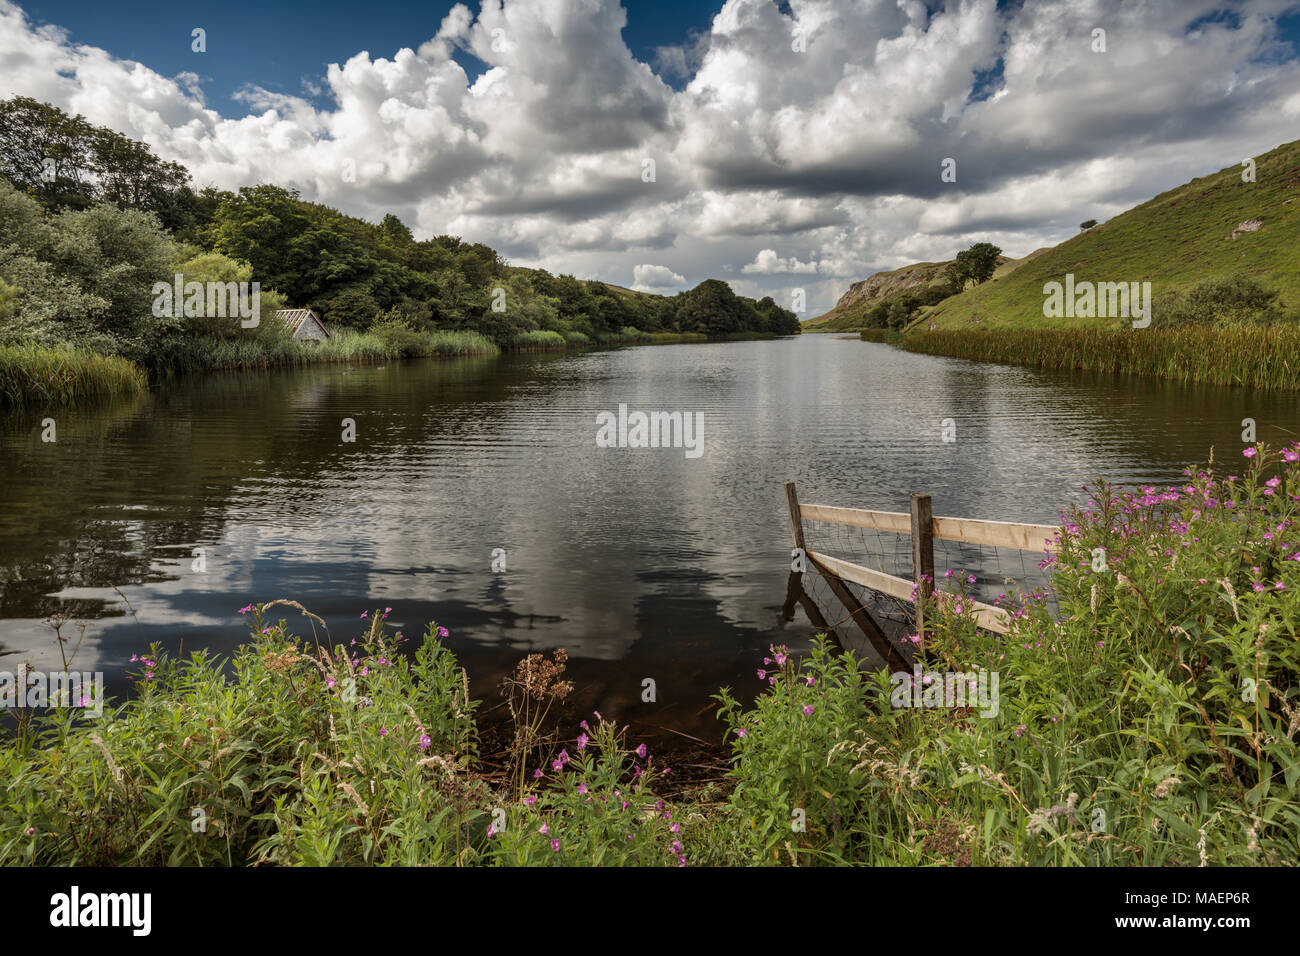 Mire Loch, East Lothian, is a man made freshwater loch situated on St Abb's Head in the Scottish Borders, just over a kilometre NW of St Abbs. Stock Photo